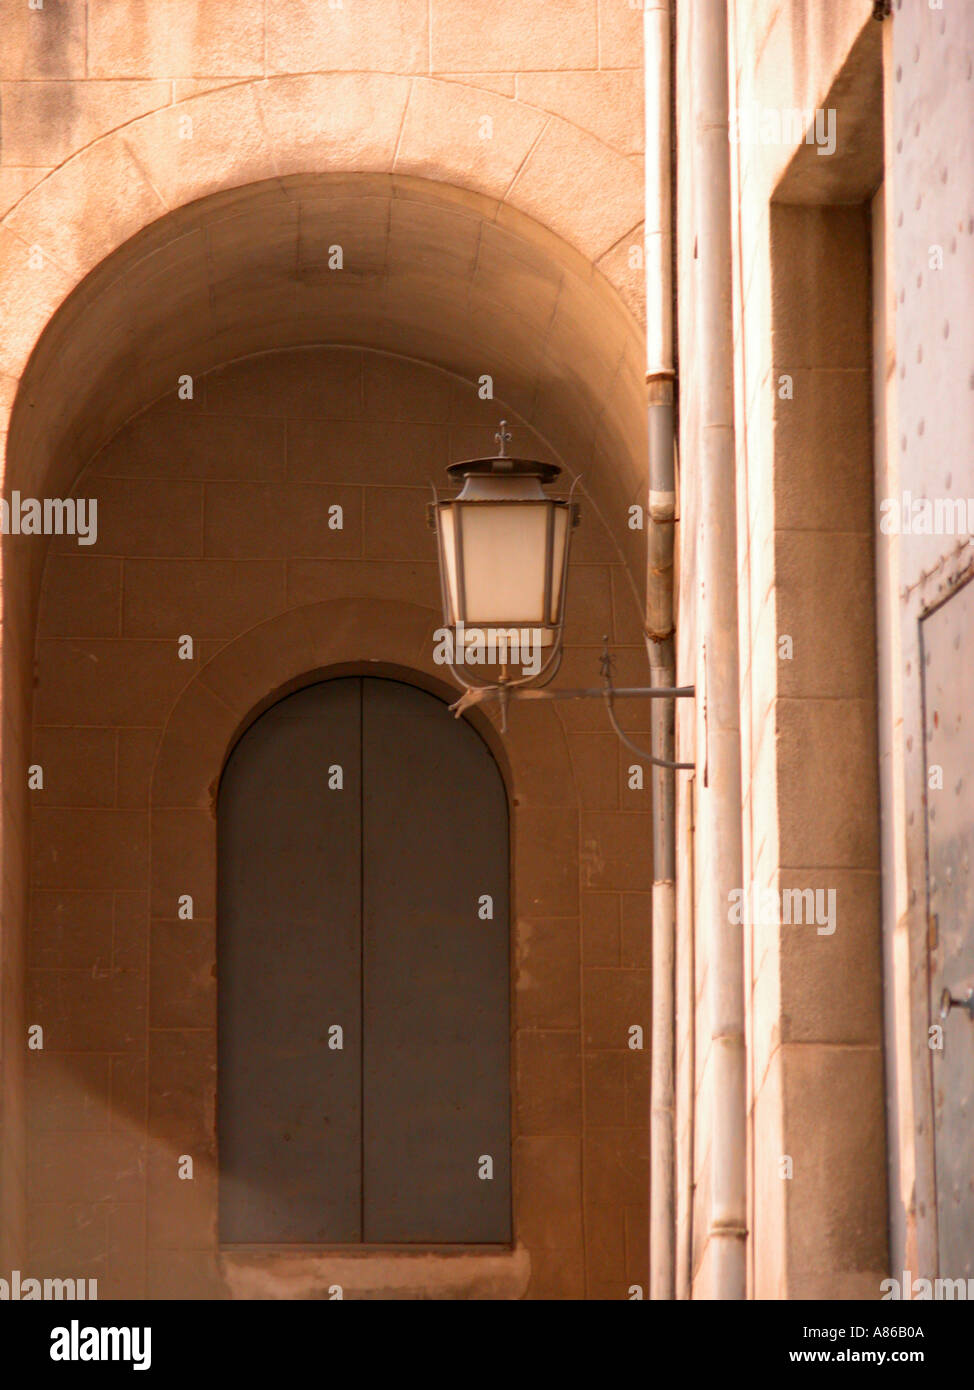 Street lamp against arched door in Old town Girona Spain Stock Photo